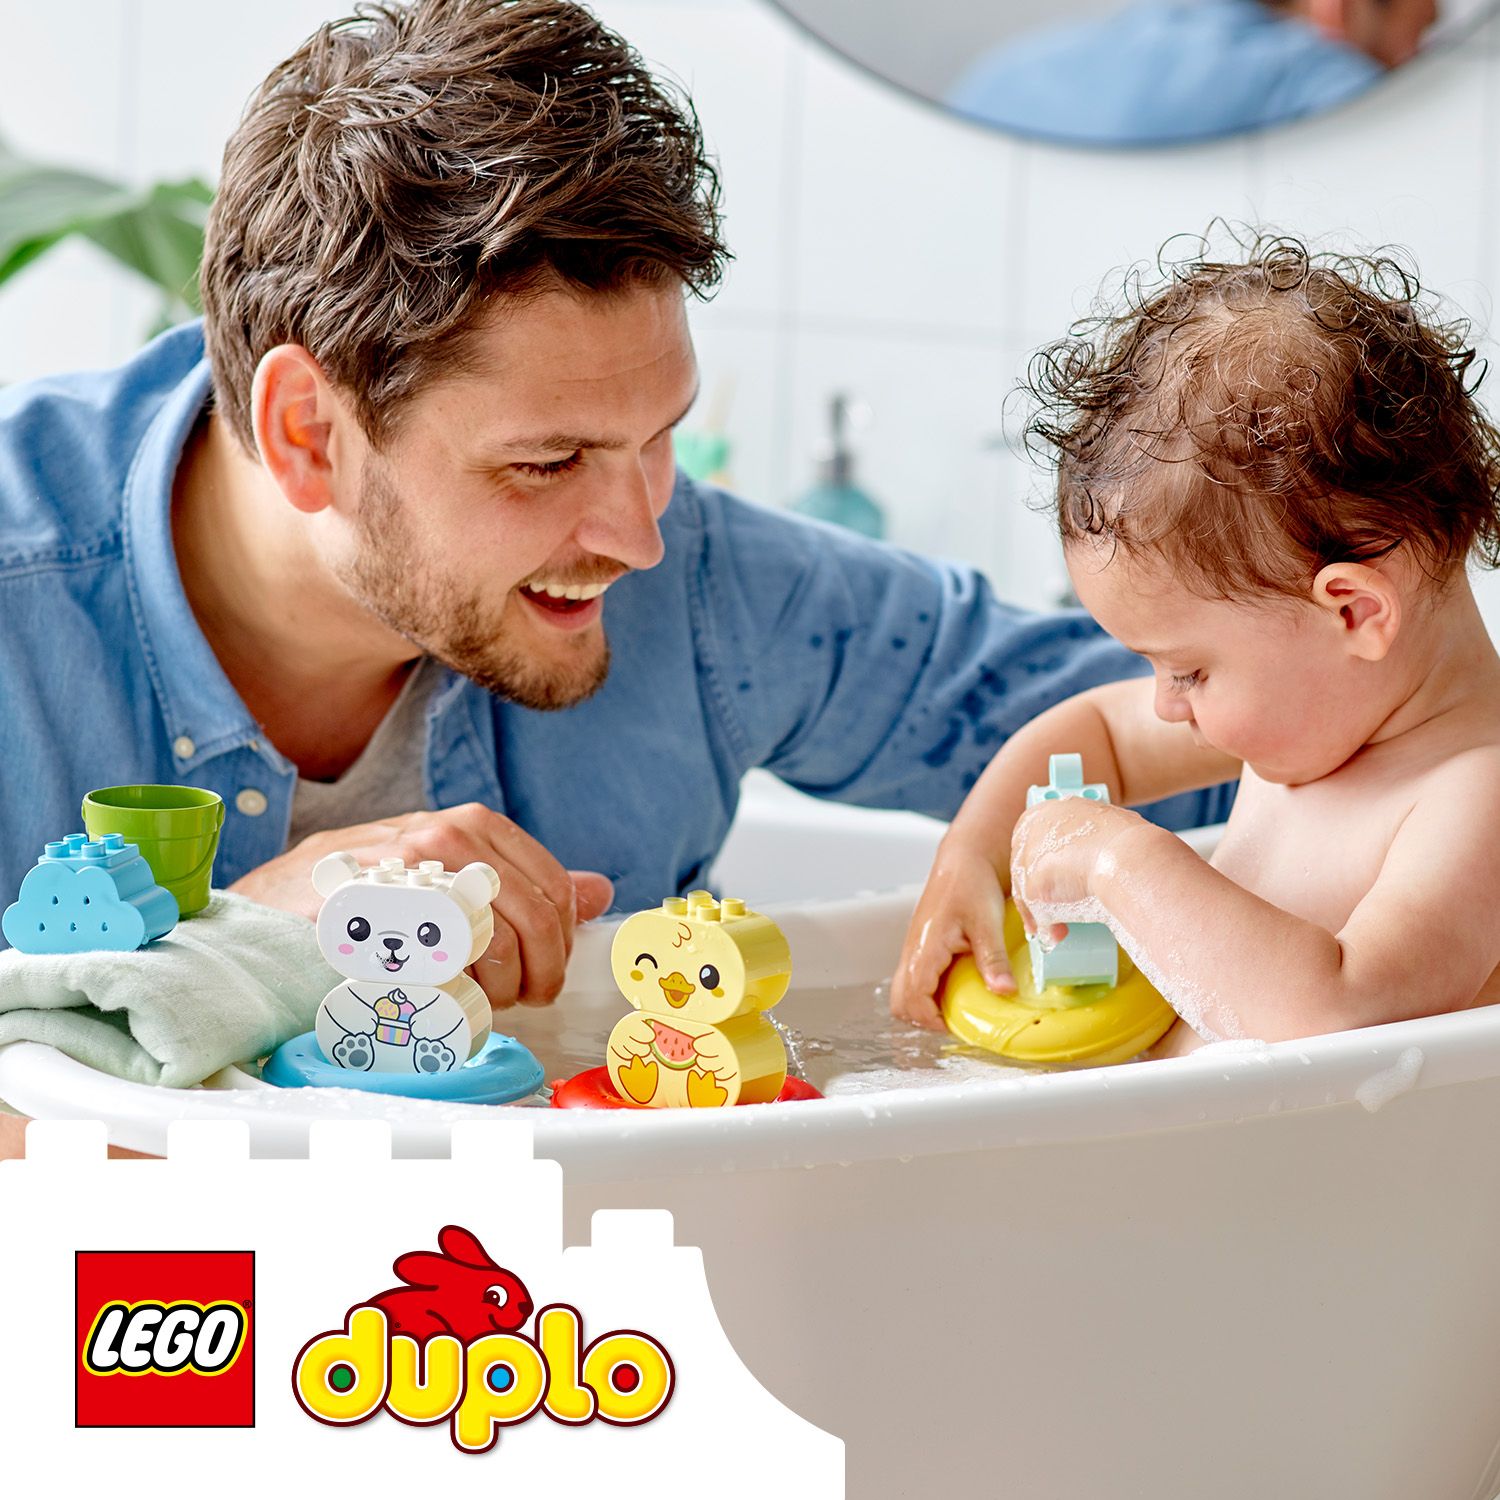 Bath-time fun for little animal lovers